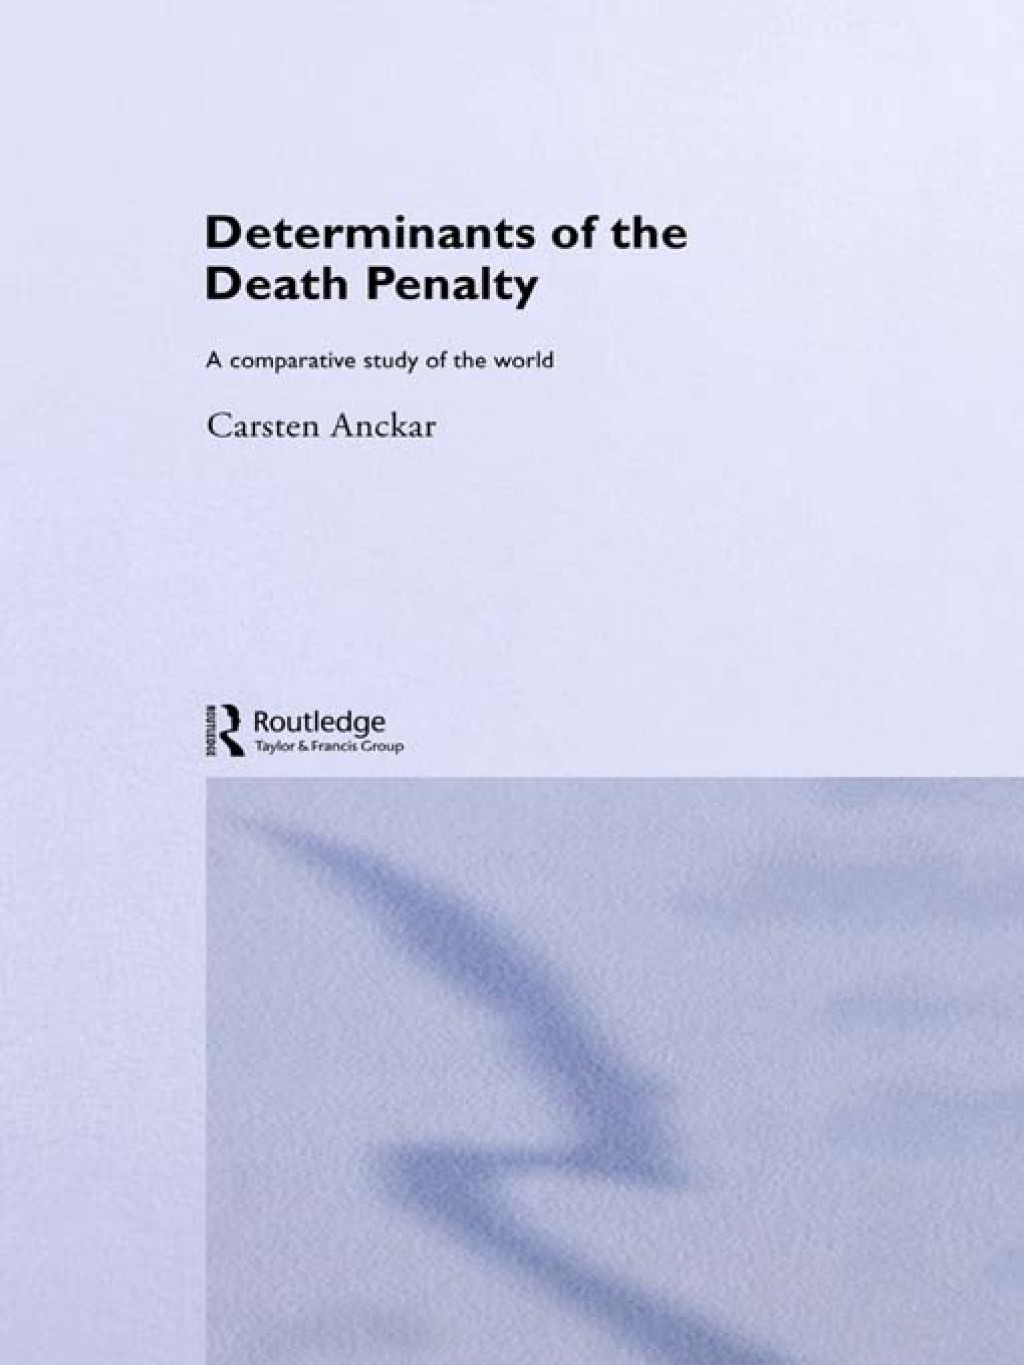 ISBN 9780415333986 product image for Determinants of the Death Penalty - 1st Edition (eBook Rental) | upcitemdb.com